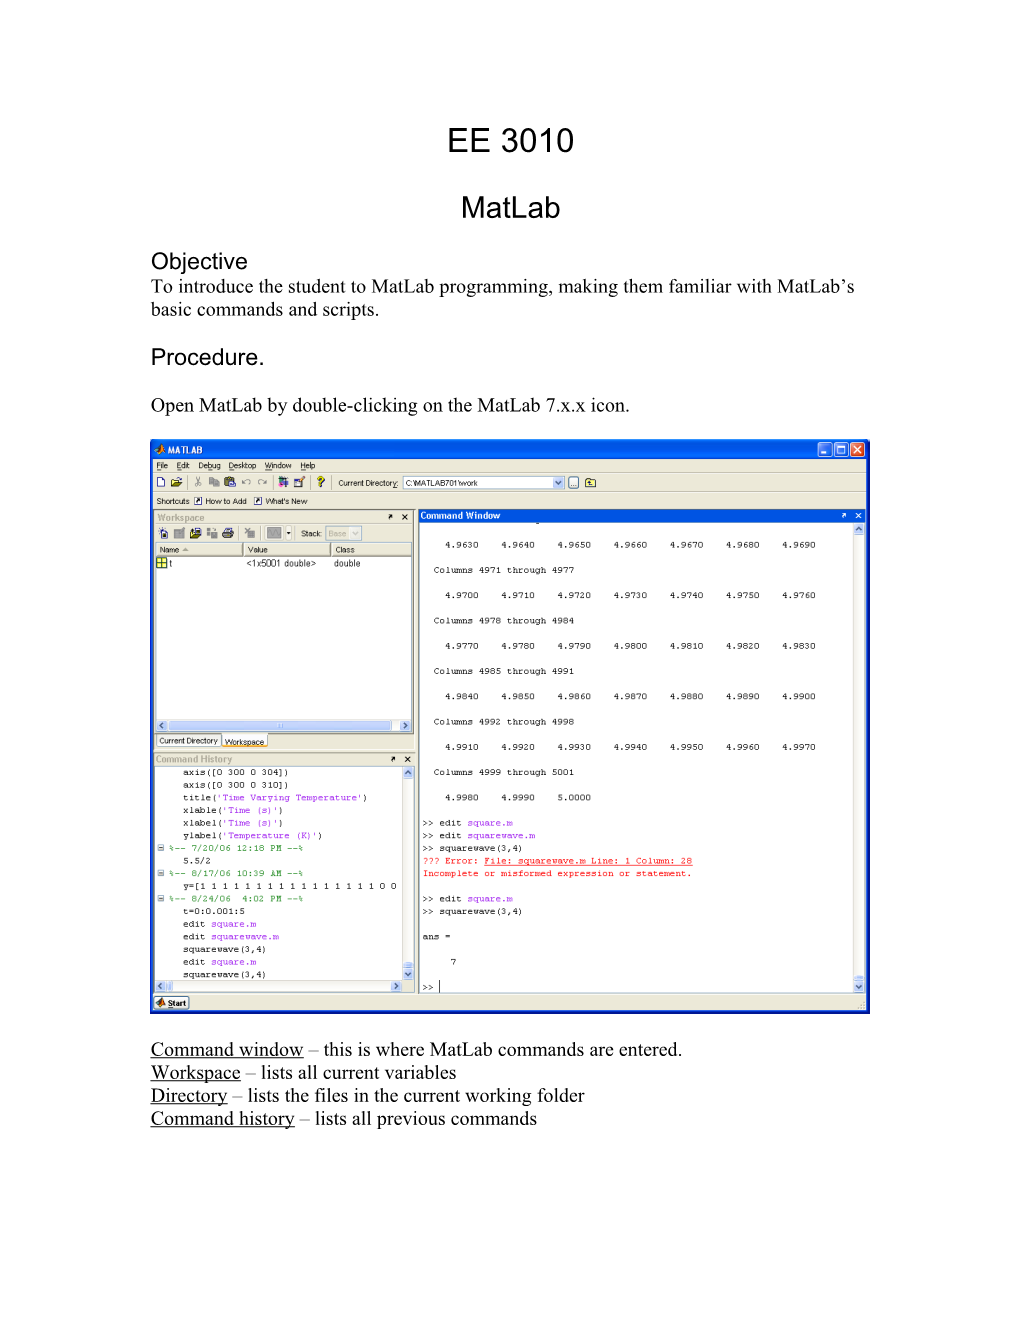 Open Matlab by Double-Clicking on the Matlab 7.X.X Icon